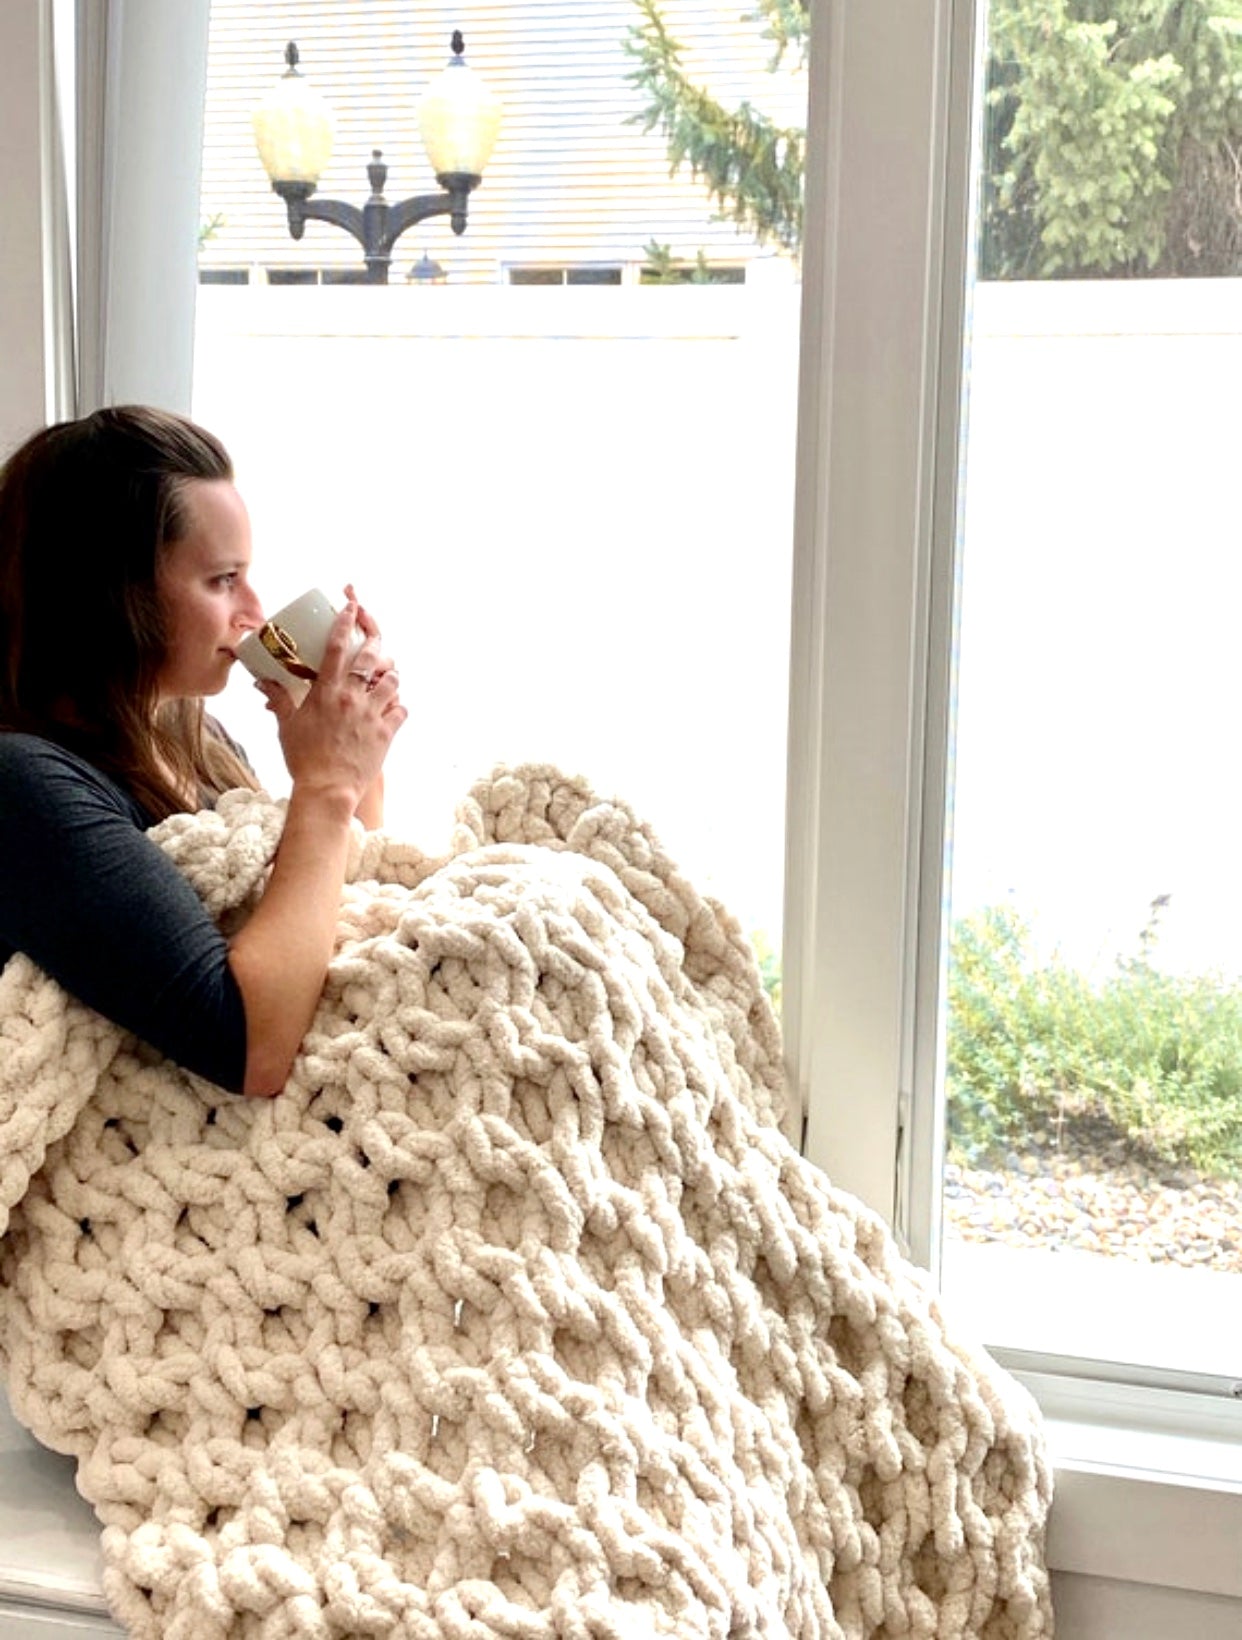 DIY No-Knit Chunky Blanket Kit with Video